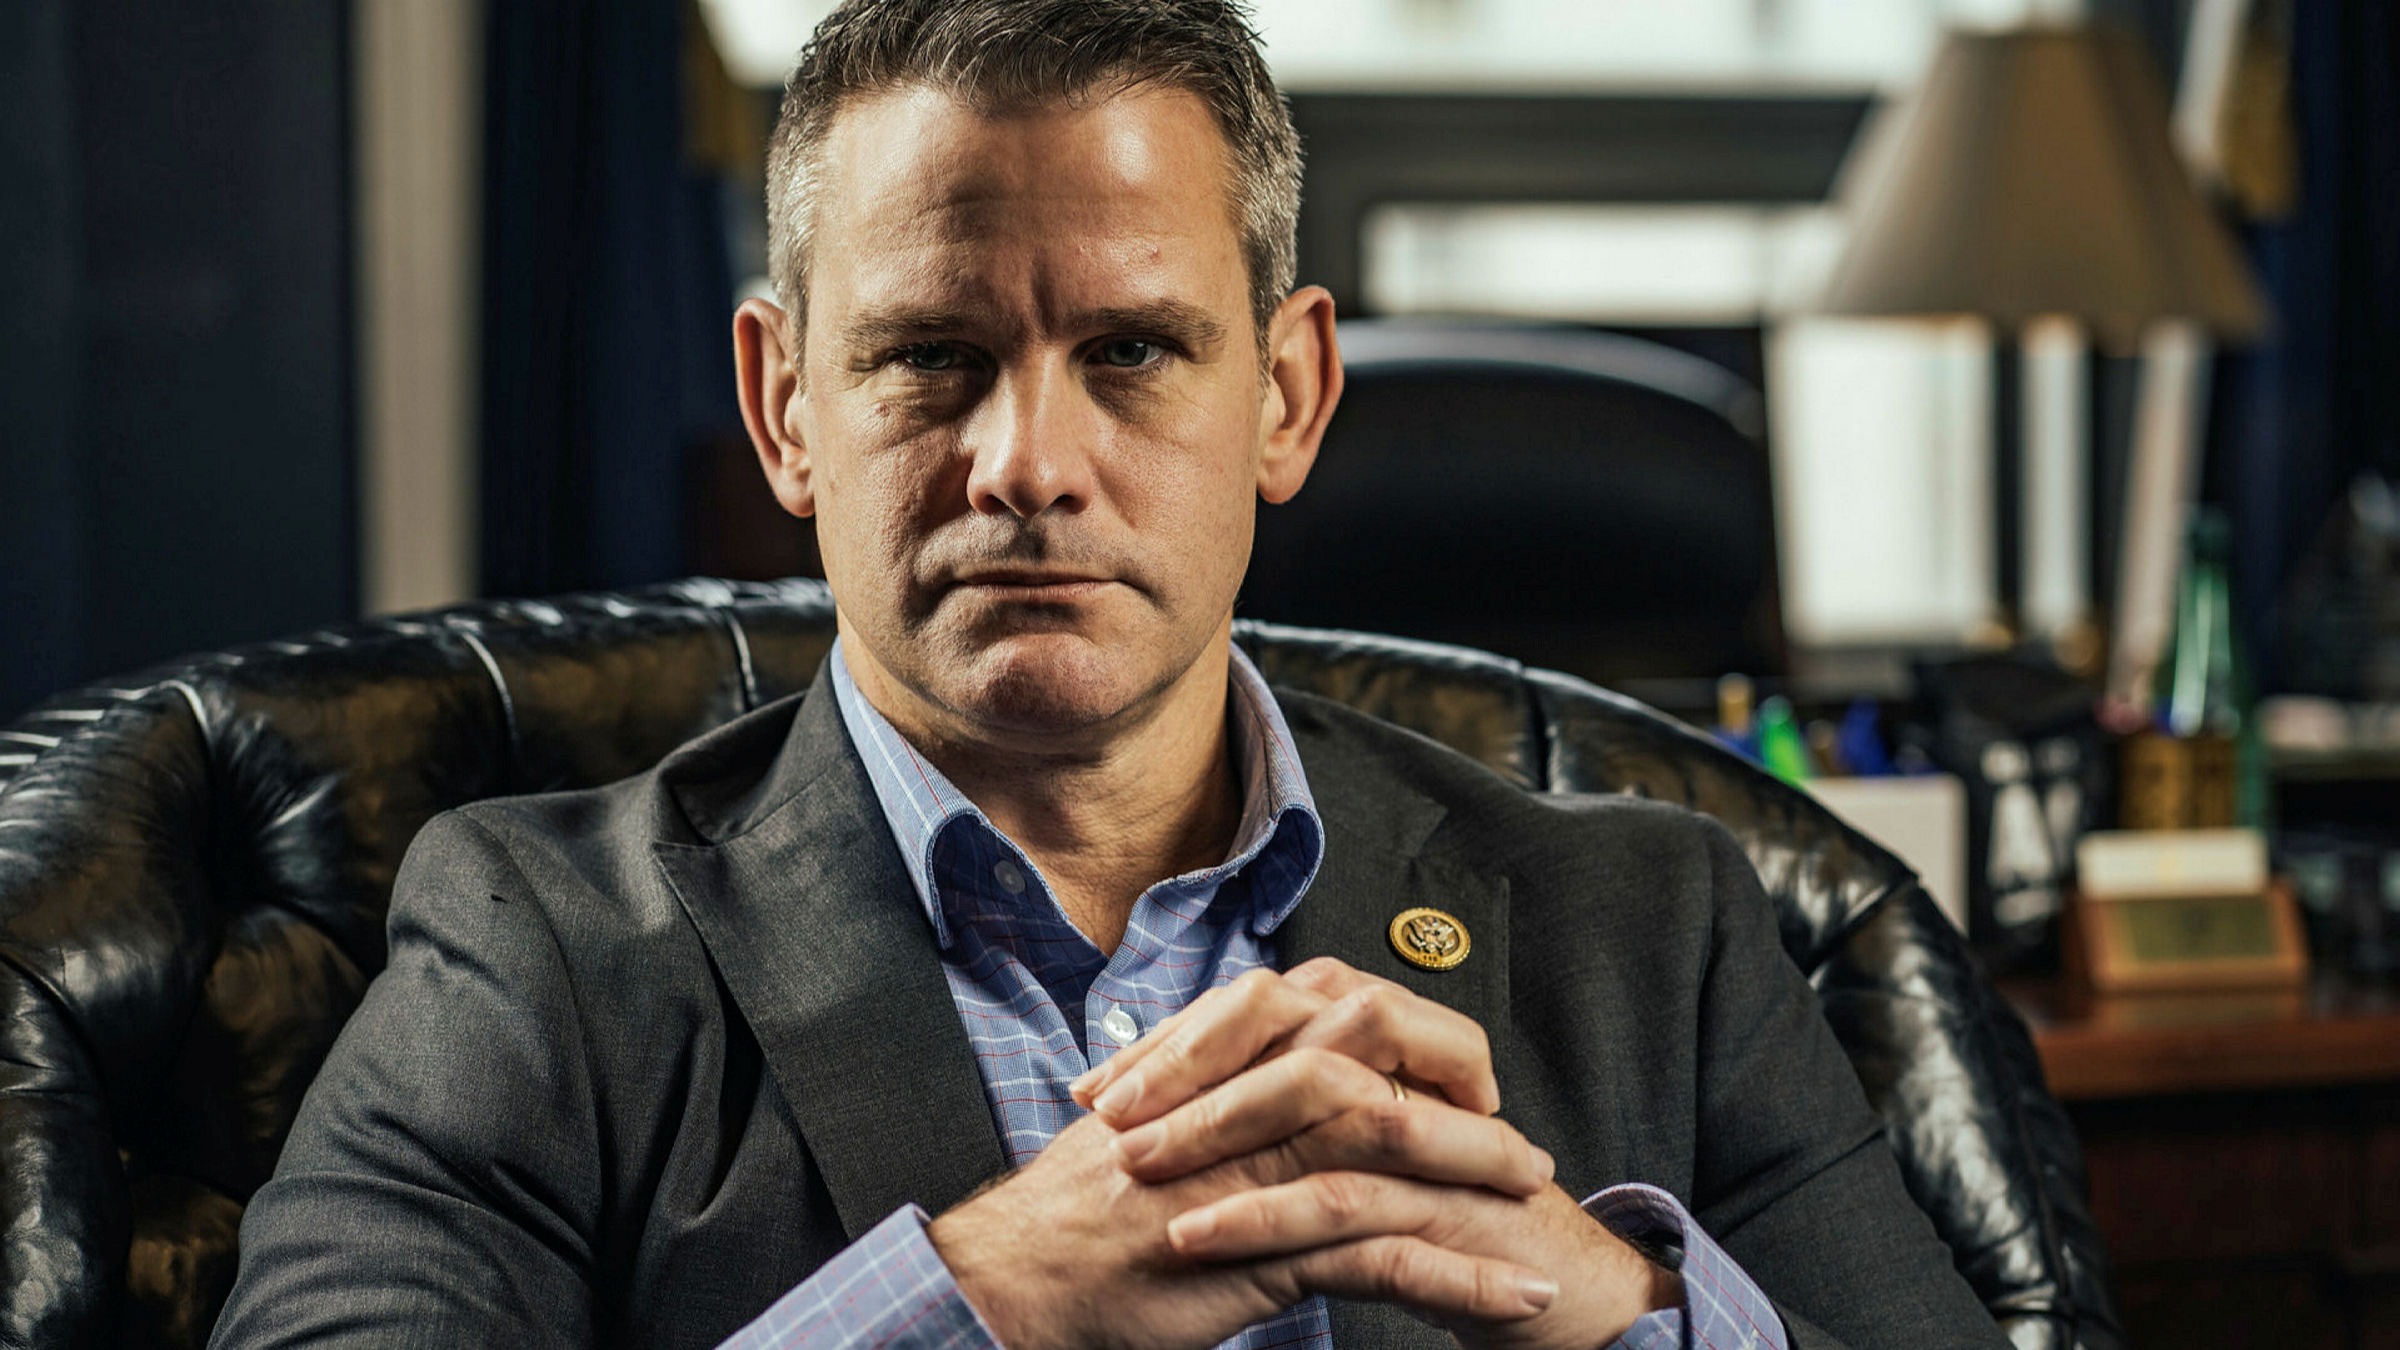 Adam Kinzinger: the 'Rino' leading the charge for a post-Trump GOP |  Financial Times